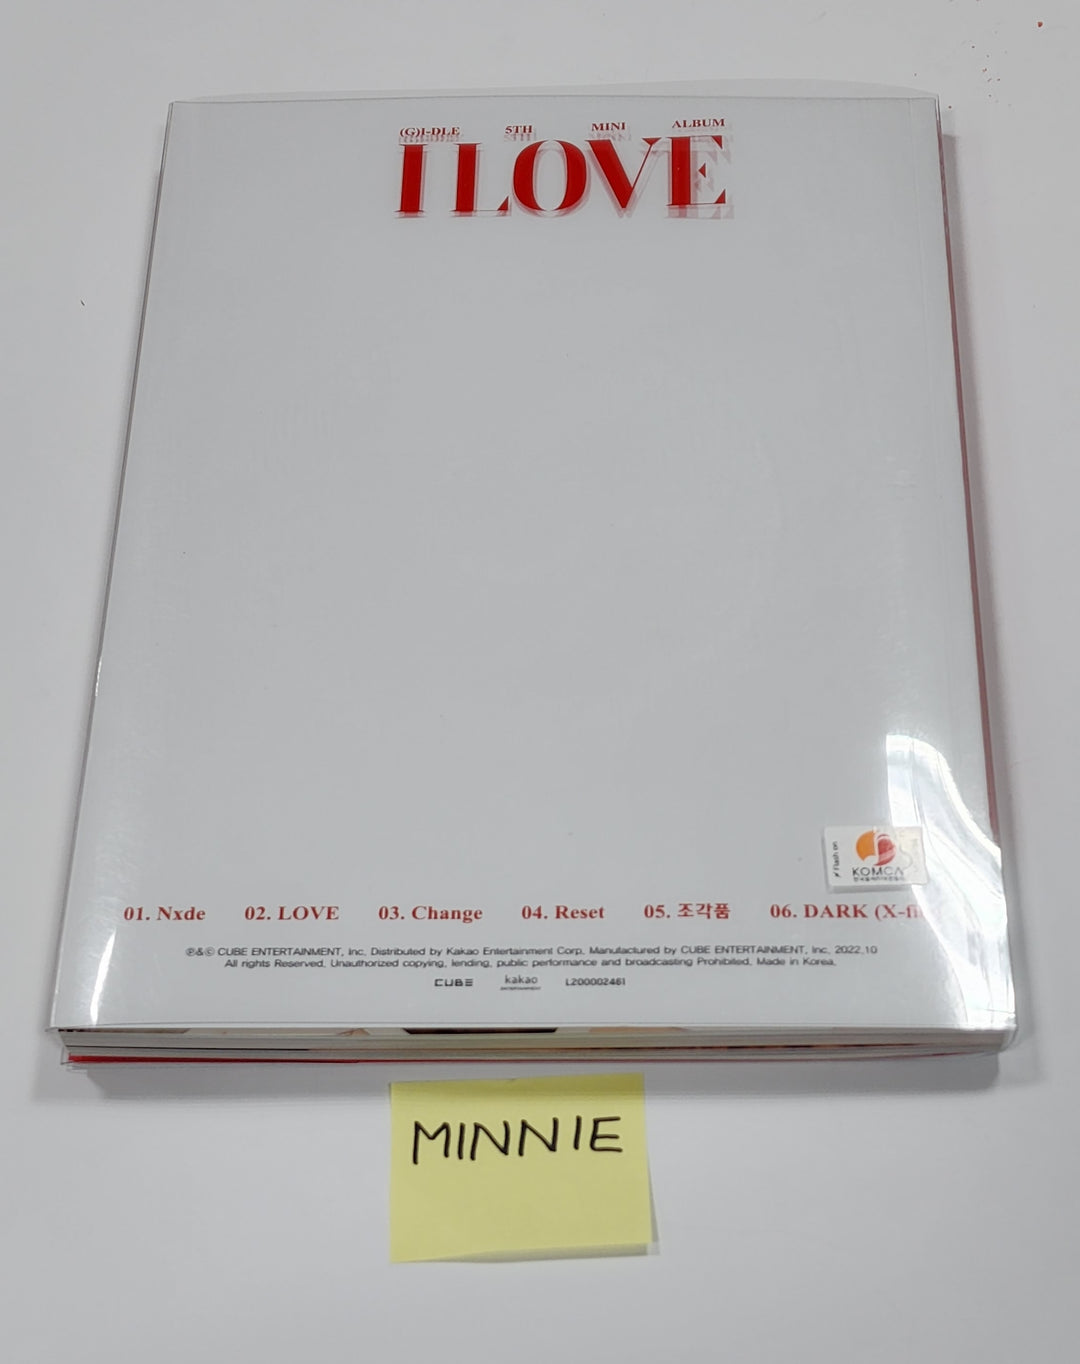 Minnie (Of (G) I-DLE) "I love" - Hand Autographed(Signed) Album